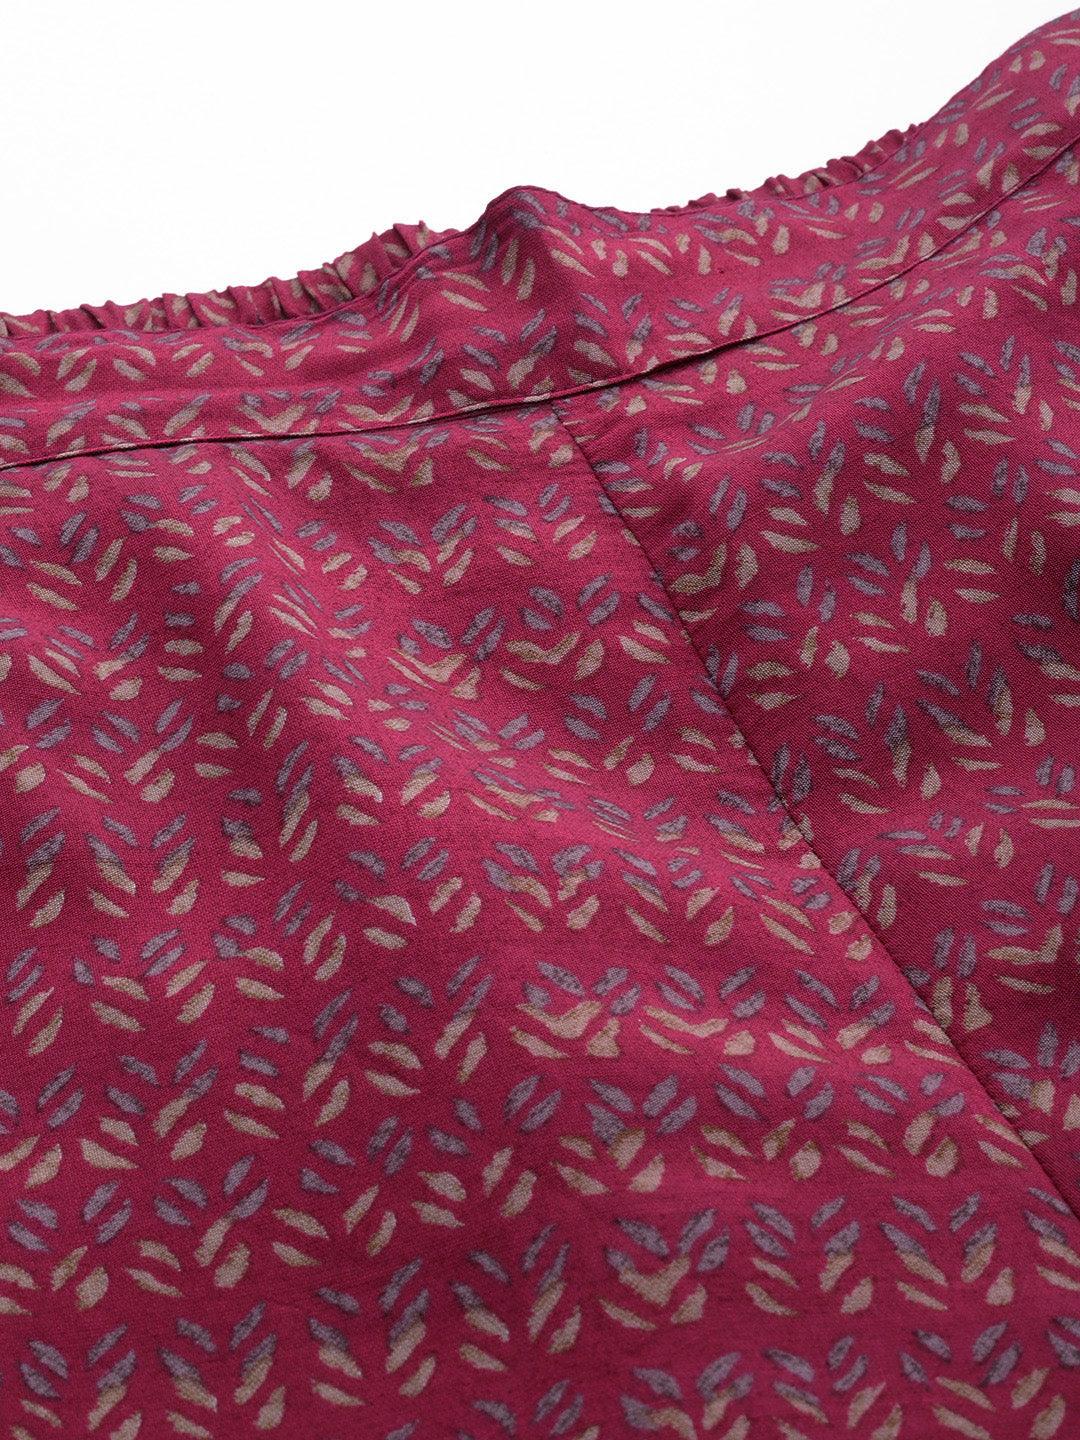 Maroon Printed Silk Blend Top With Trousers - Libas